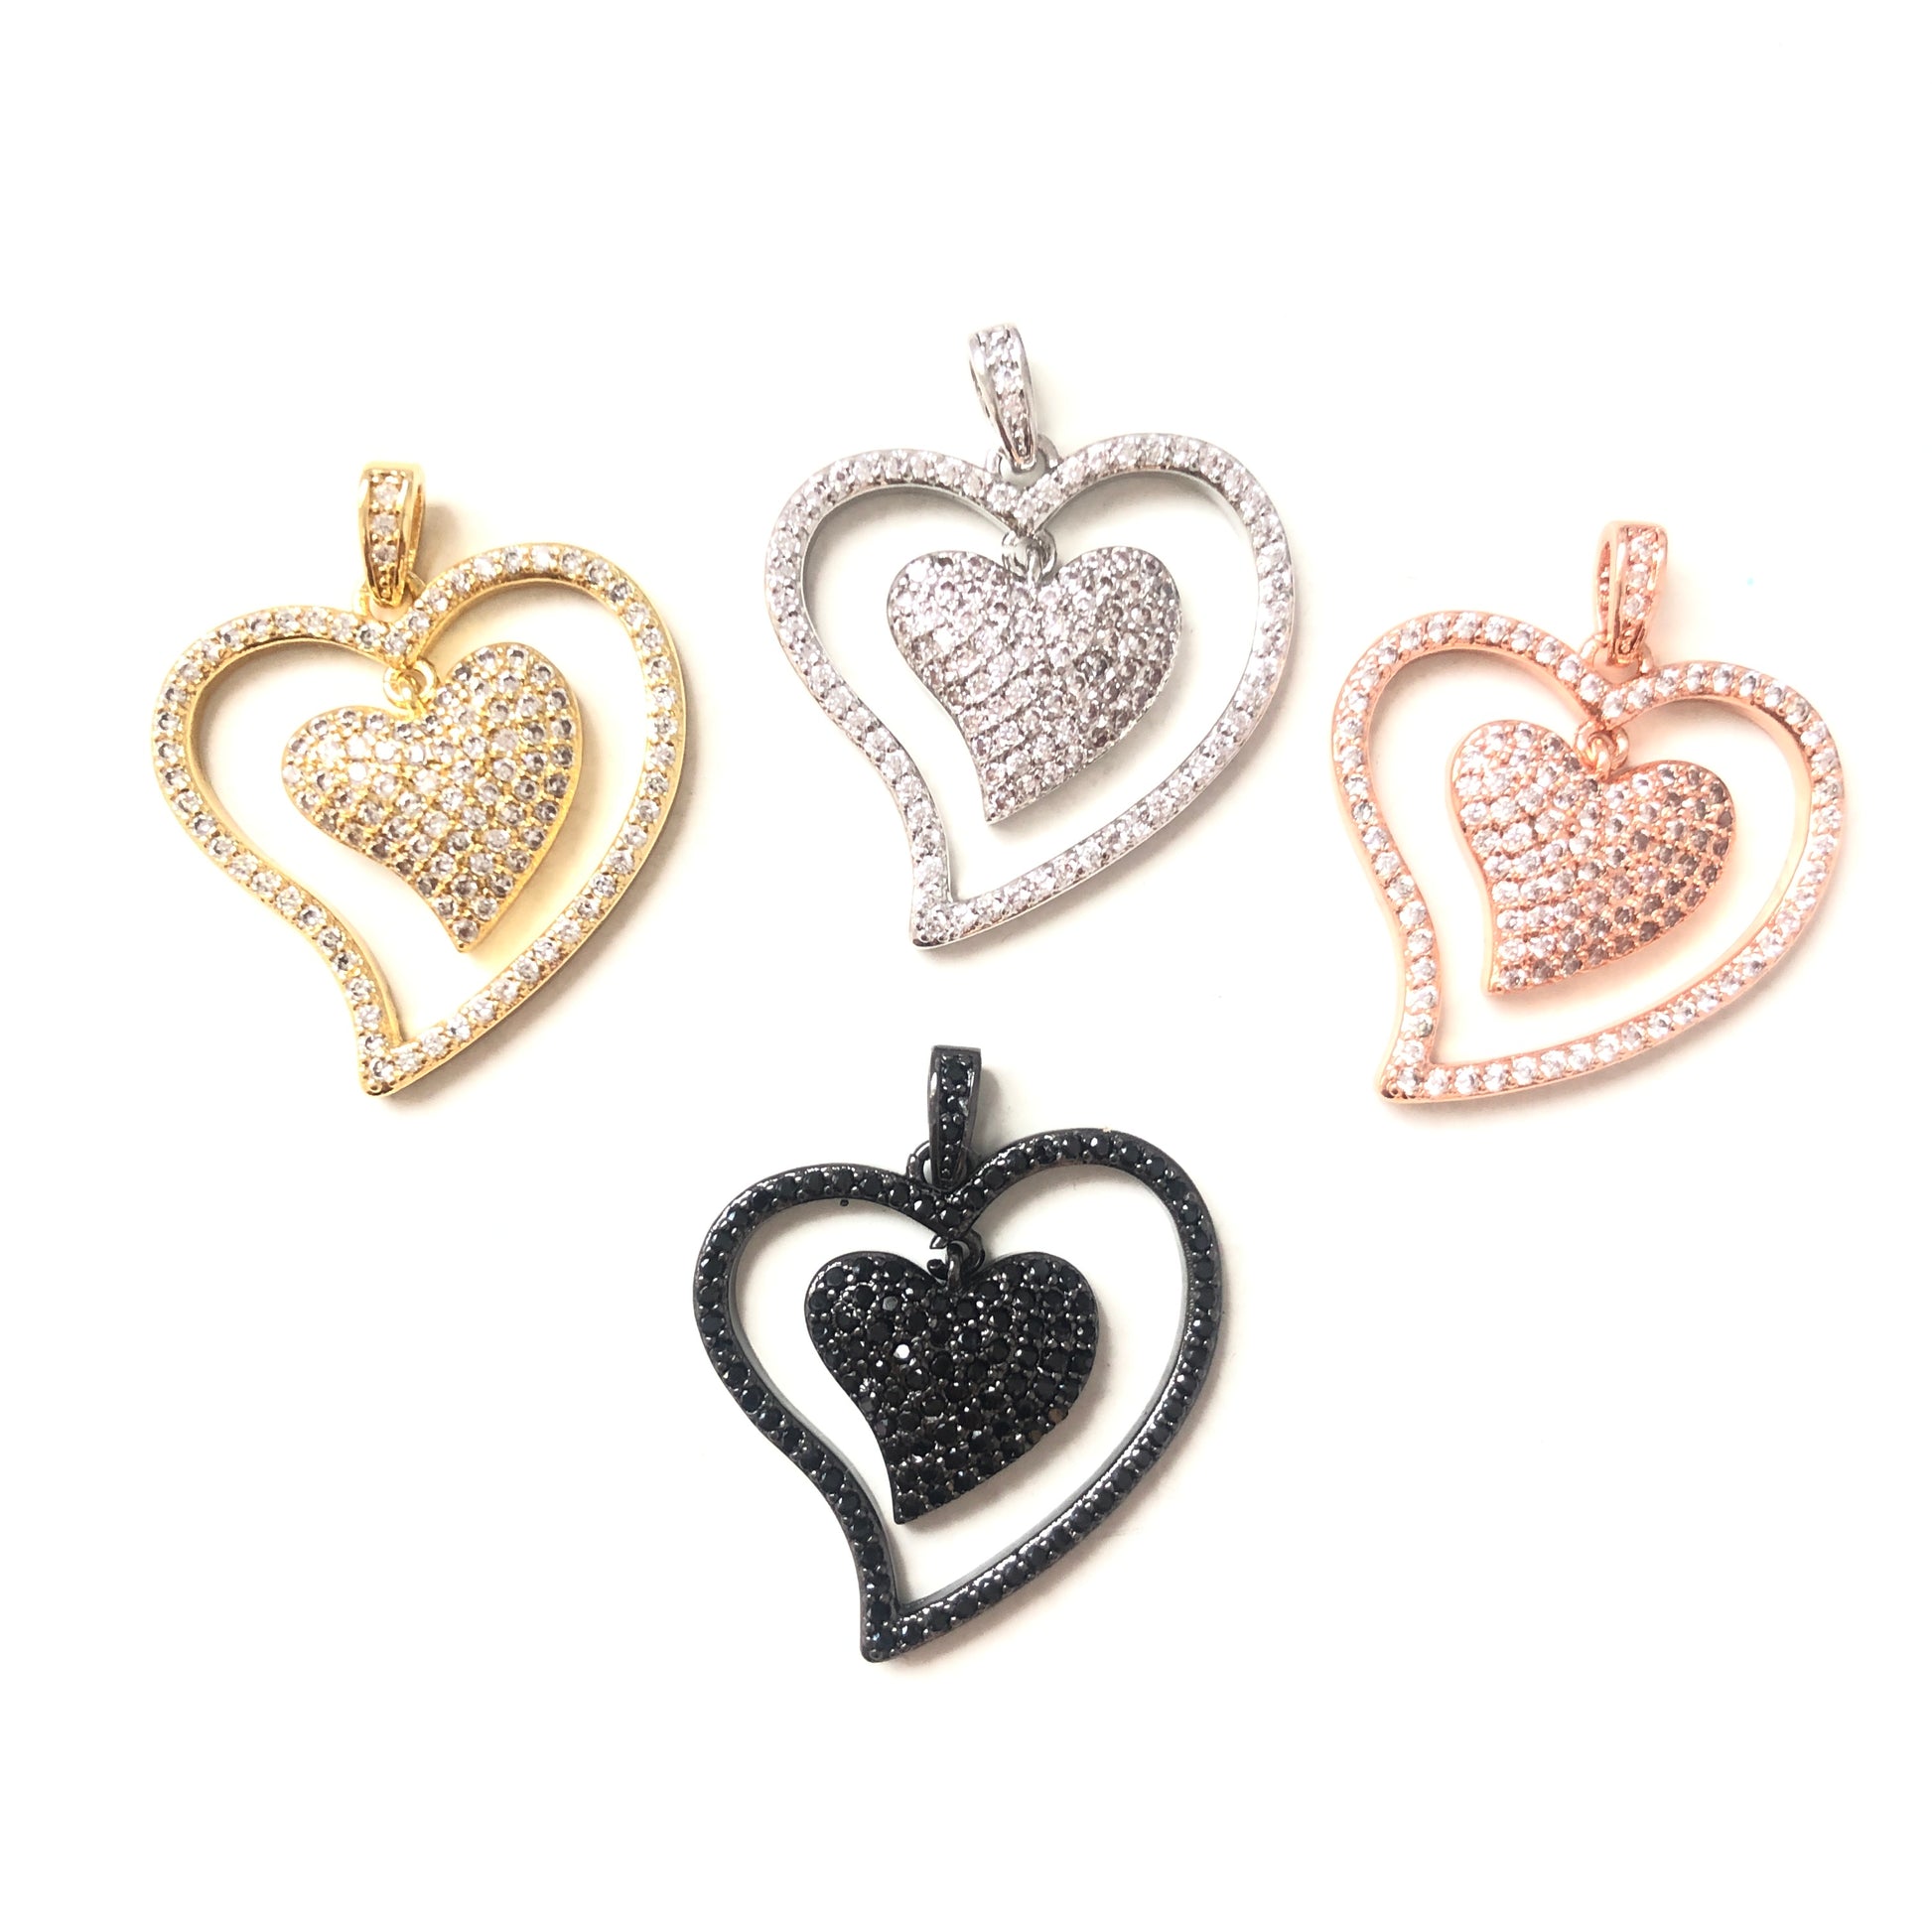 10pcs/lot 25.5*24mm CZ Paved Double Heart Charms CZ Paved Charms Hearts On Sale Charms Beads Beyond